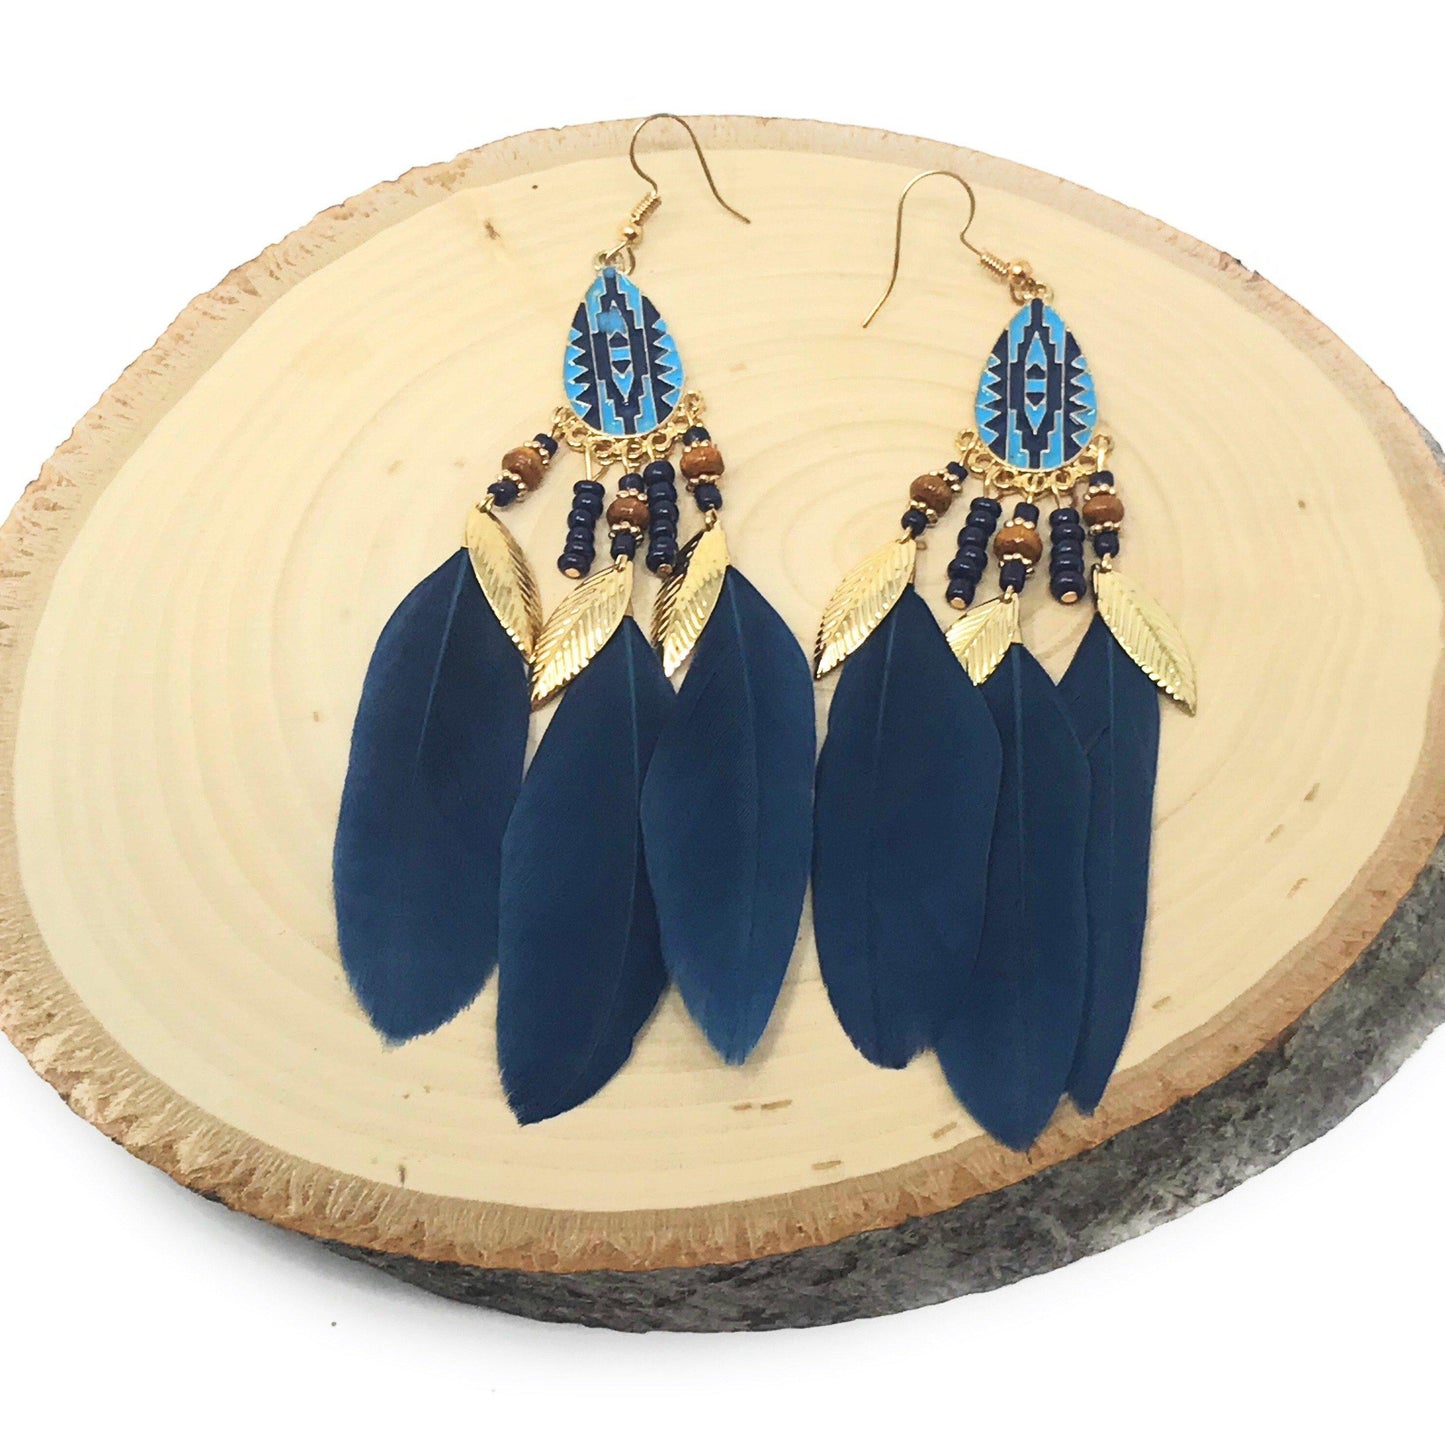 Blue Feather Dangle Earrings - Boho-inspired Chic Accessories